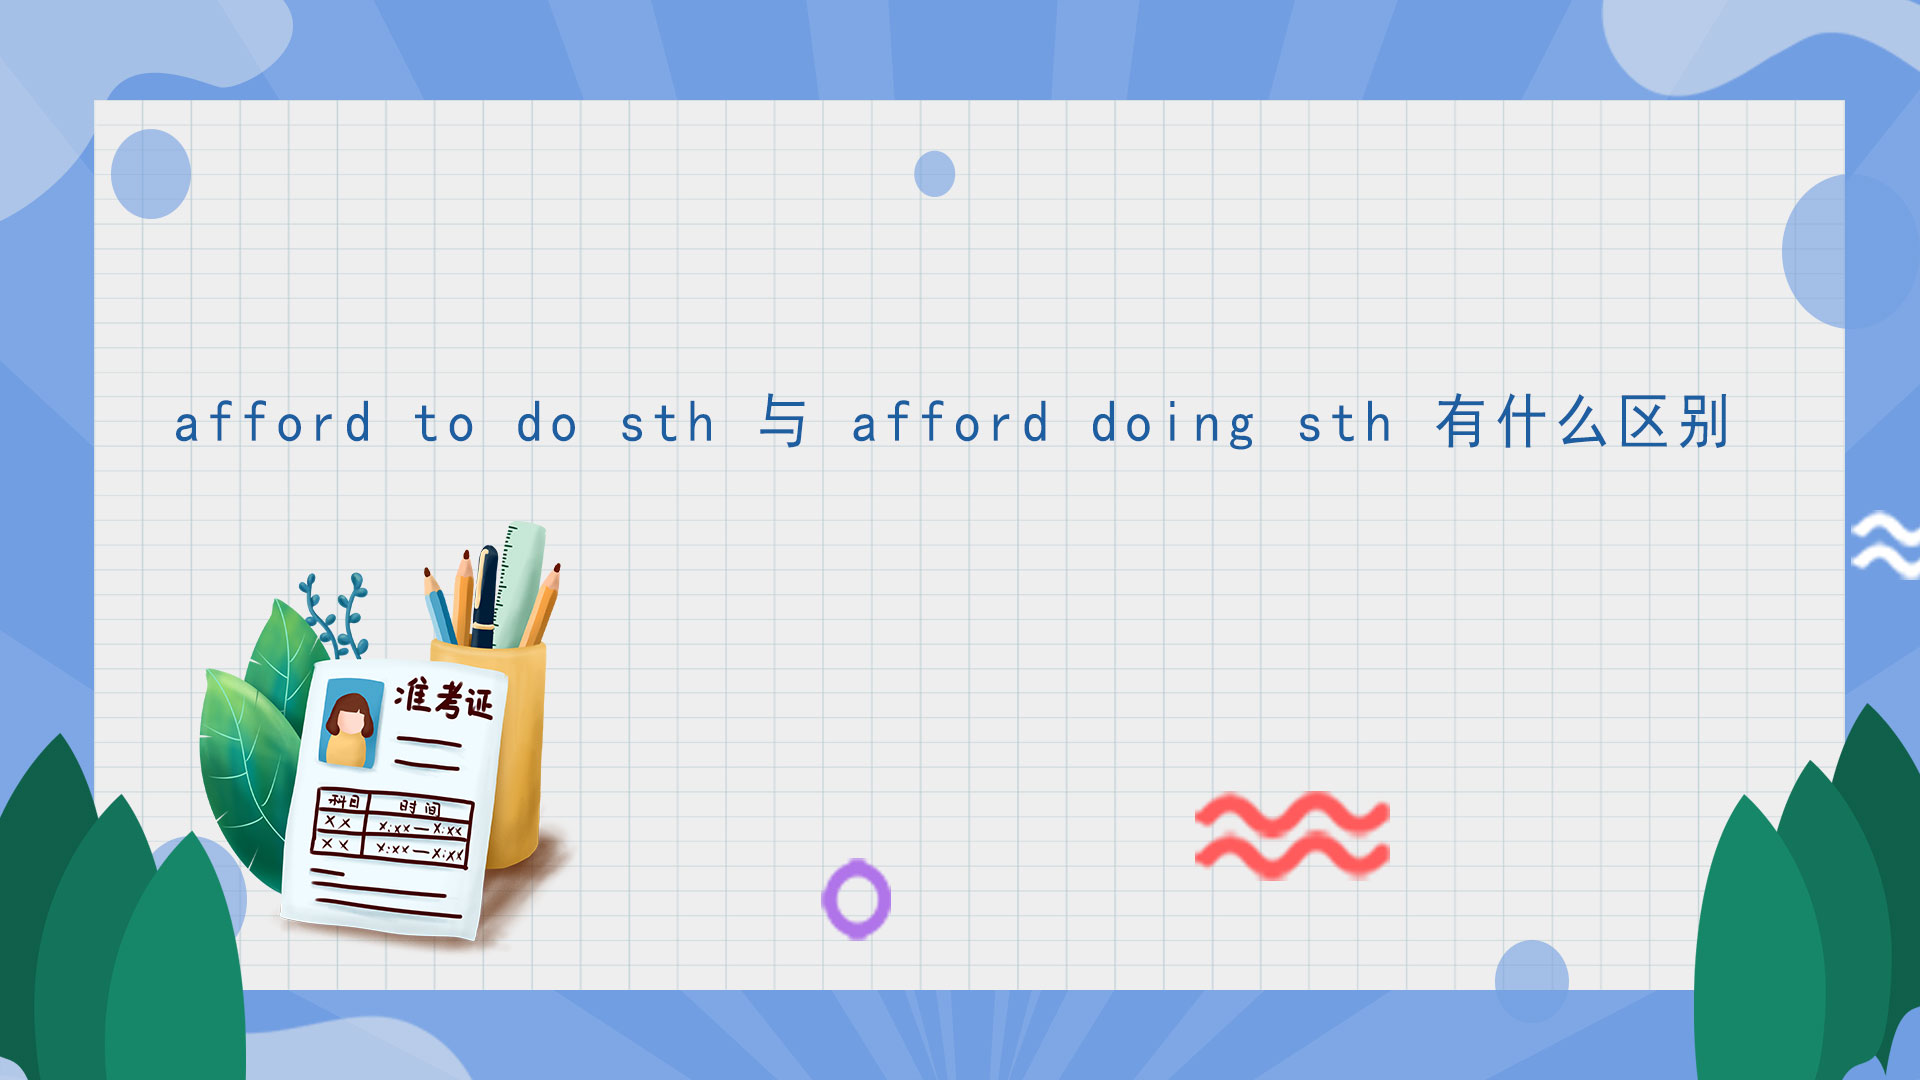 afford to do sth 与 afford doing sth 有什么区别